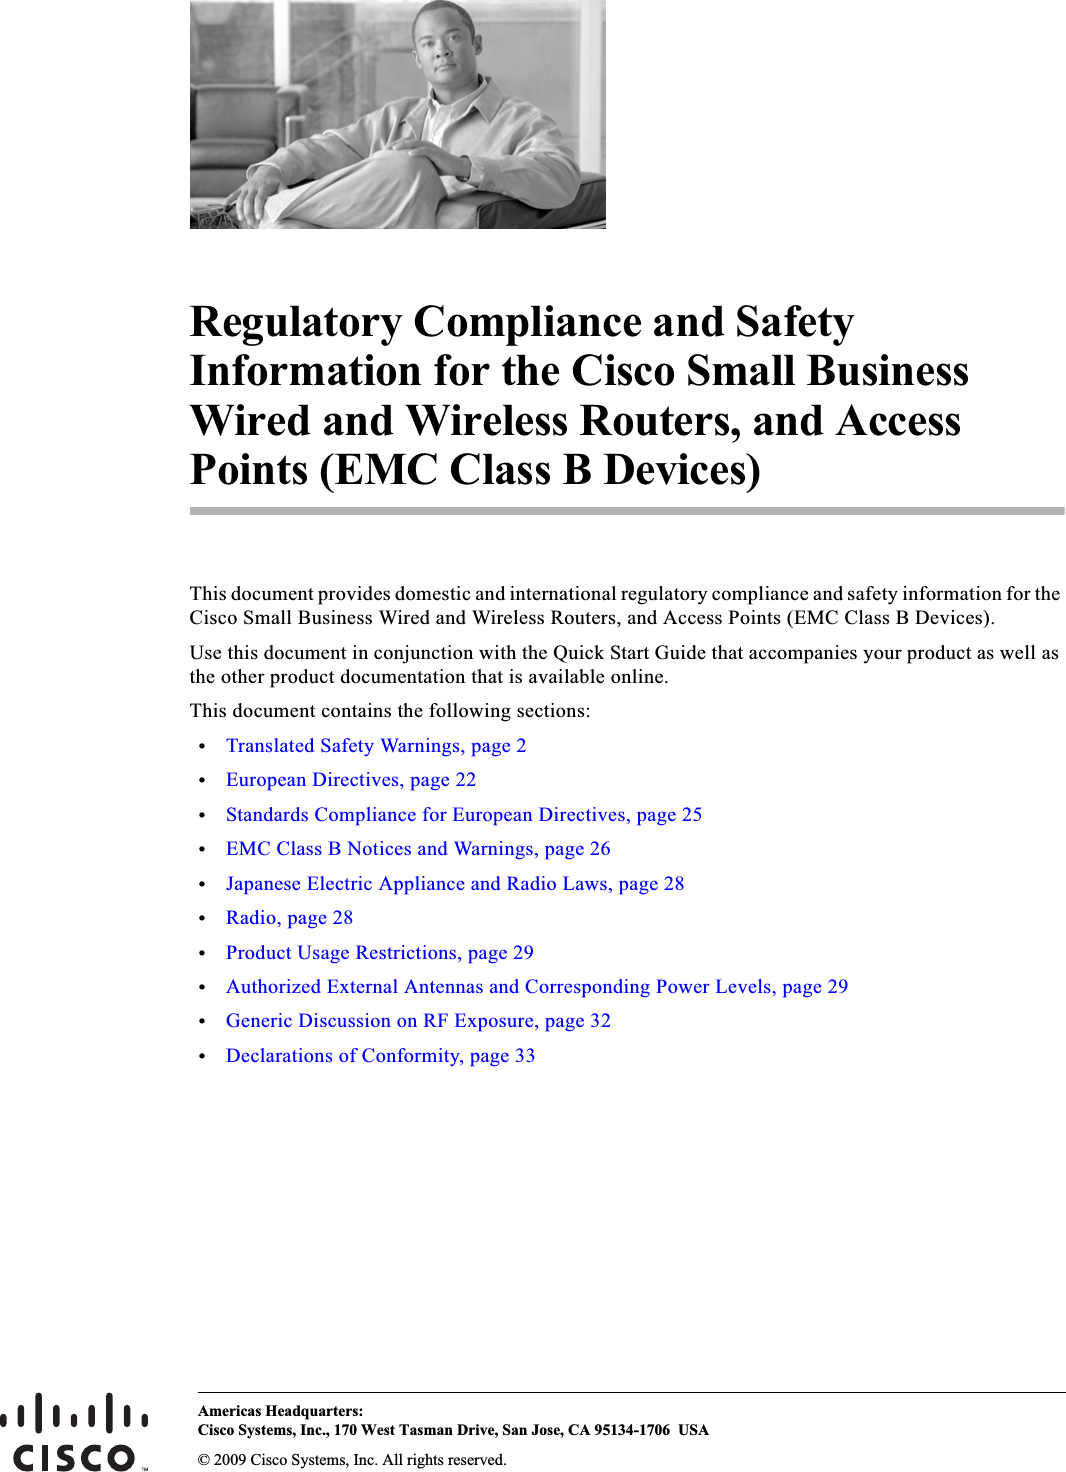 Americas Headquarters:© 2009 Cisco Systems, Inc. All rights reserved.Cisco Systems, Inc., 170 West Tasman Drive, San Jose, CA 95134-1706 USARegulatory Compliance and Safety Information for the Cisco Small Business Wired and Wireless Routers, and Access Points (EMC Class B Devices)This document provides domestic and international regulatory compliance and safety information for the Cisco Small Business Wired and Wireless Routers, and Access Points (EMC Class B Devices). Use this document in conjunction with the Quick Start Guide that accompanies your product as well as the other product documentation that is available online.This document contains the following sections:•Translated Safety Warnings, page 2•European Directives, page 22•Standards Compliance for European Directives, page 25•EMC Class B Notices and Warnings, page 26•Japanese Electric Appliance and Radio Laws, page 28•Radio, page 28•Product Usage Restrictions, page 29•Authorized External Antennas and Corresponding Power Levels, page 29•Generic Discussion on RF Exposure, page 32•Declarations of Conformity, page 33